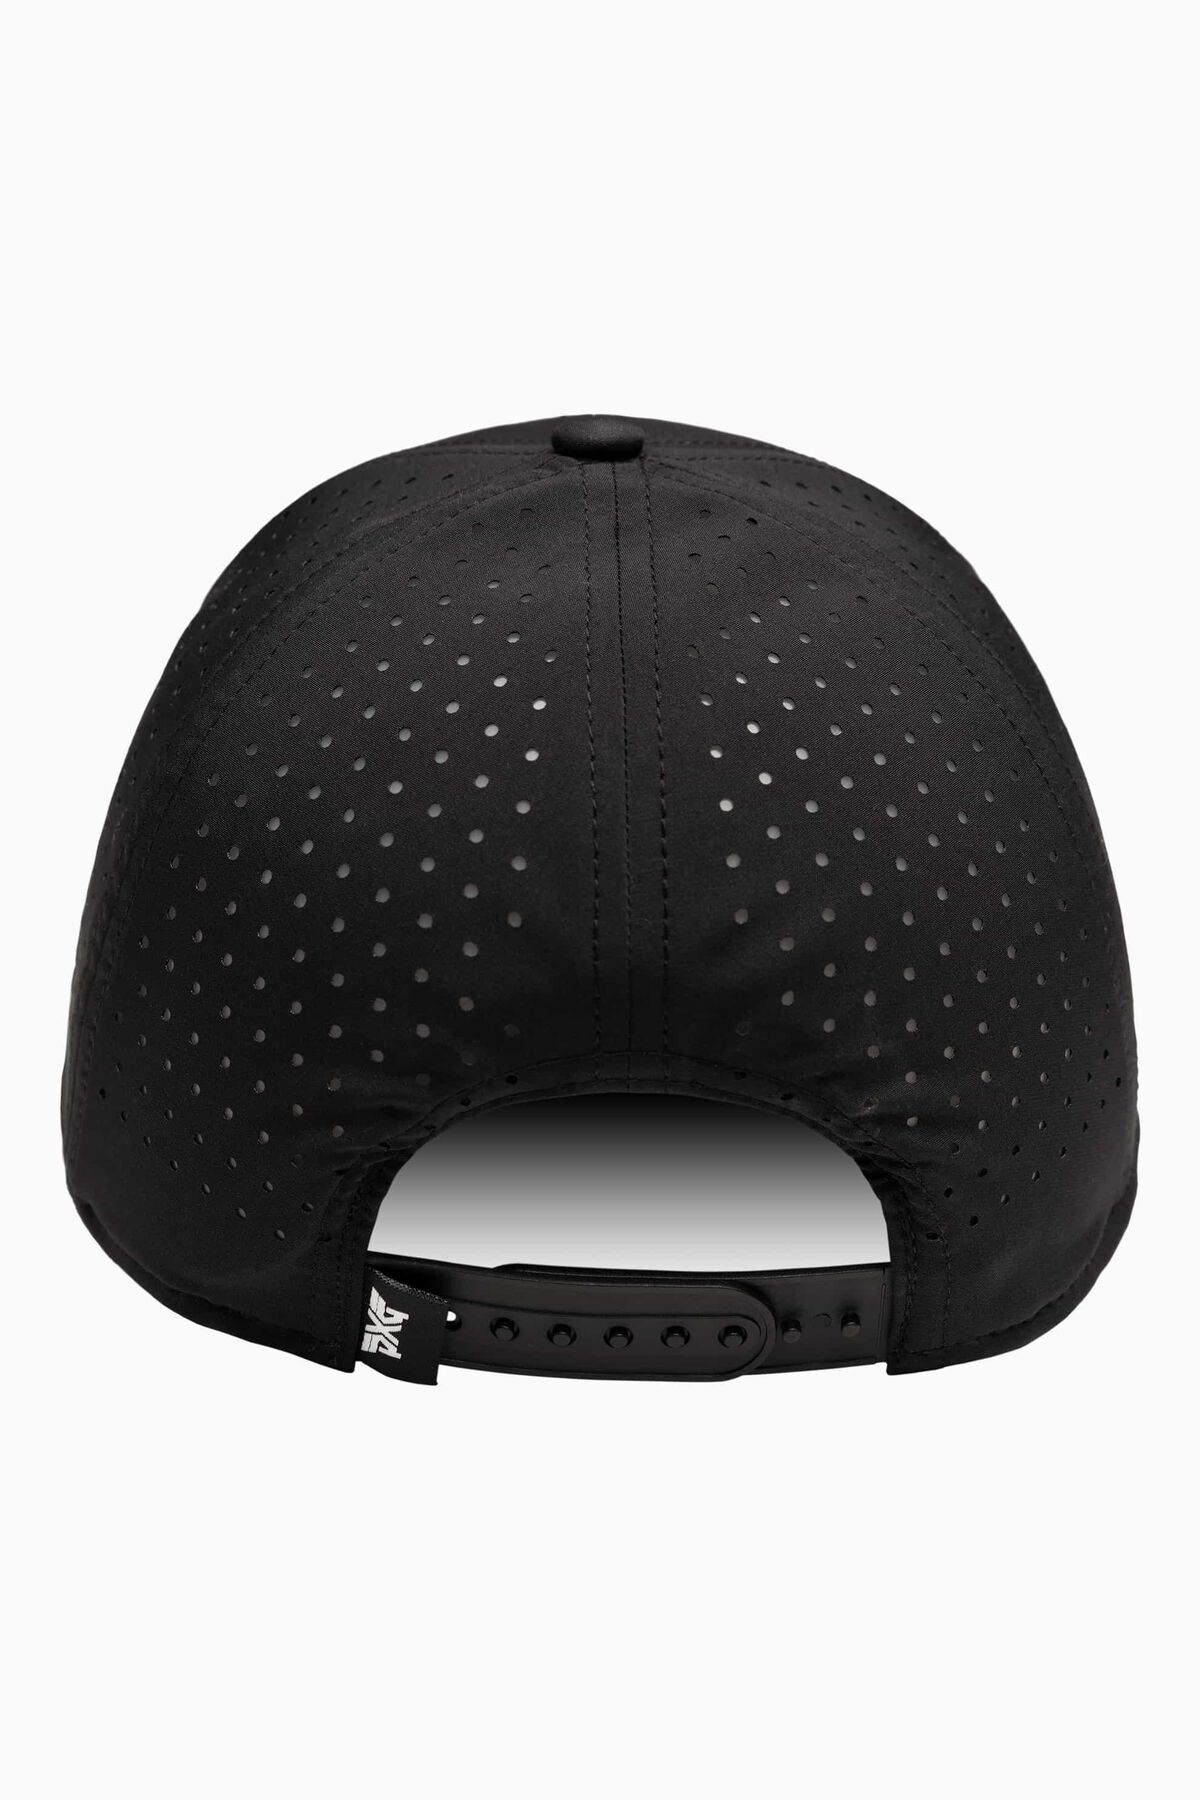 Buy Faceted Large 6 Panel Bill Cap | Structured Curved PXG